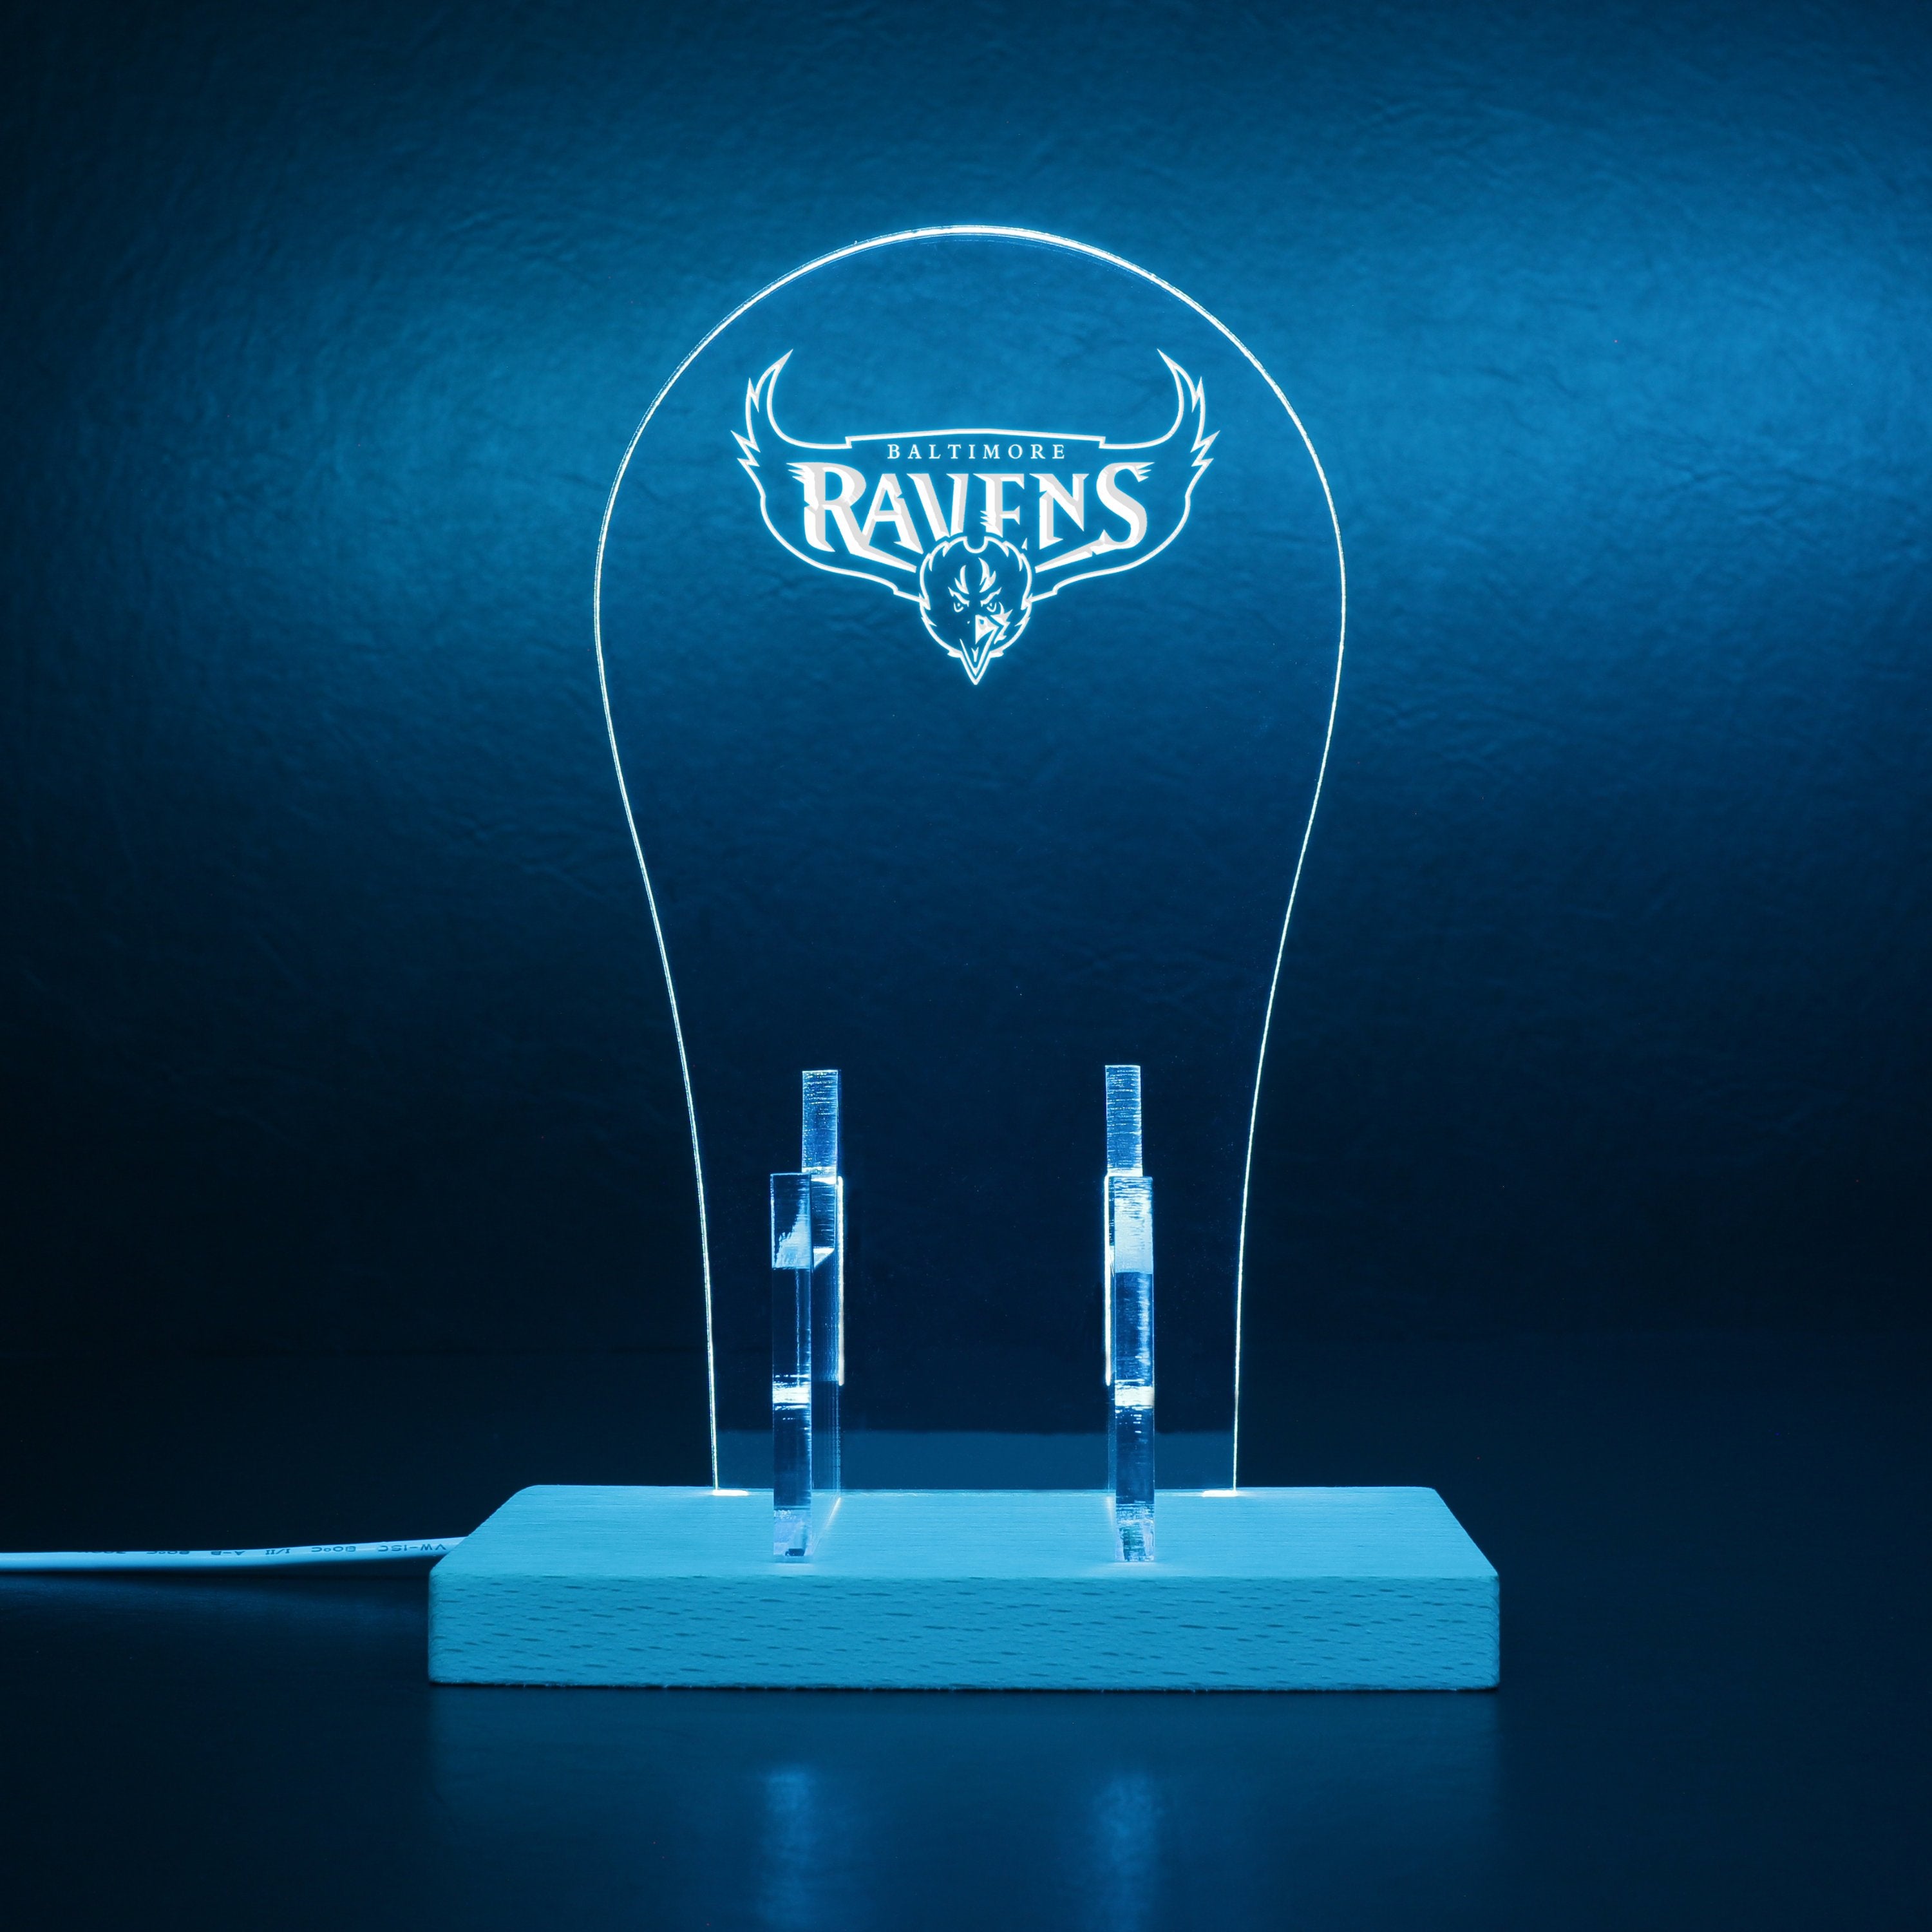 Baltimore Ravens Script Logo In Use From 1996-1998 RGB LED Gaming Headset Controller Stand